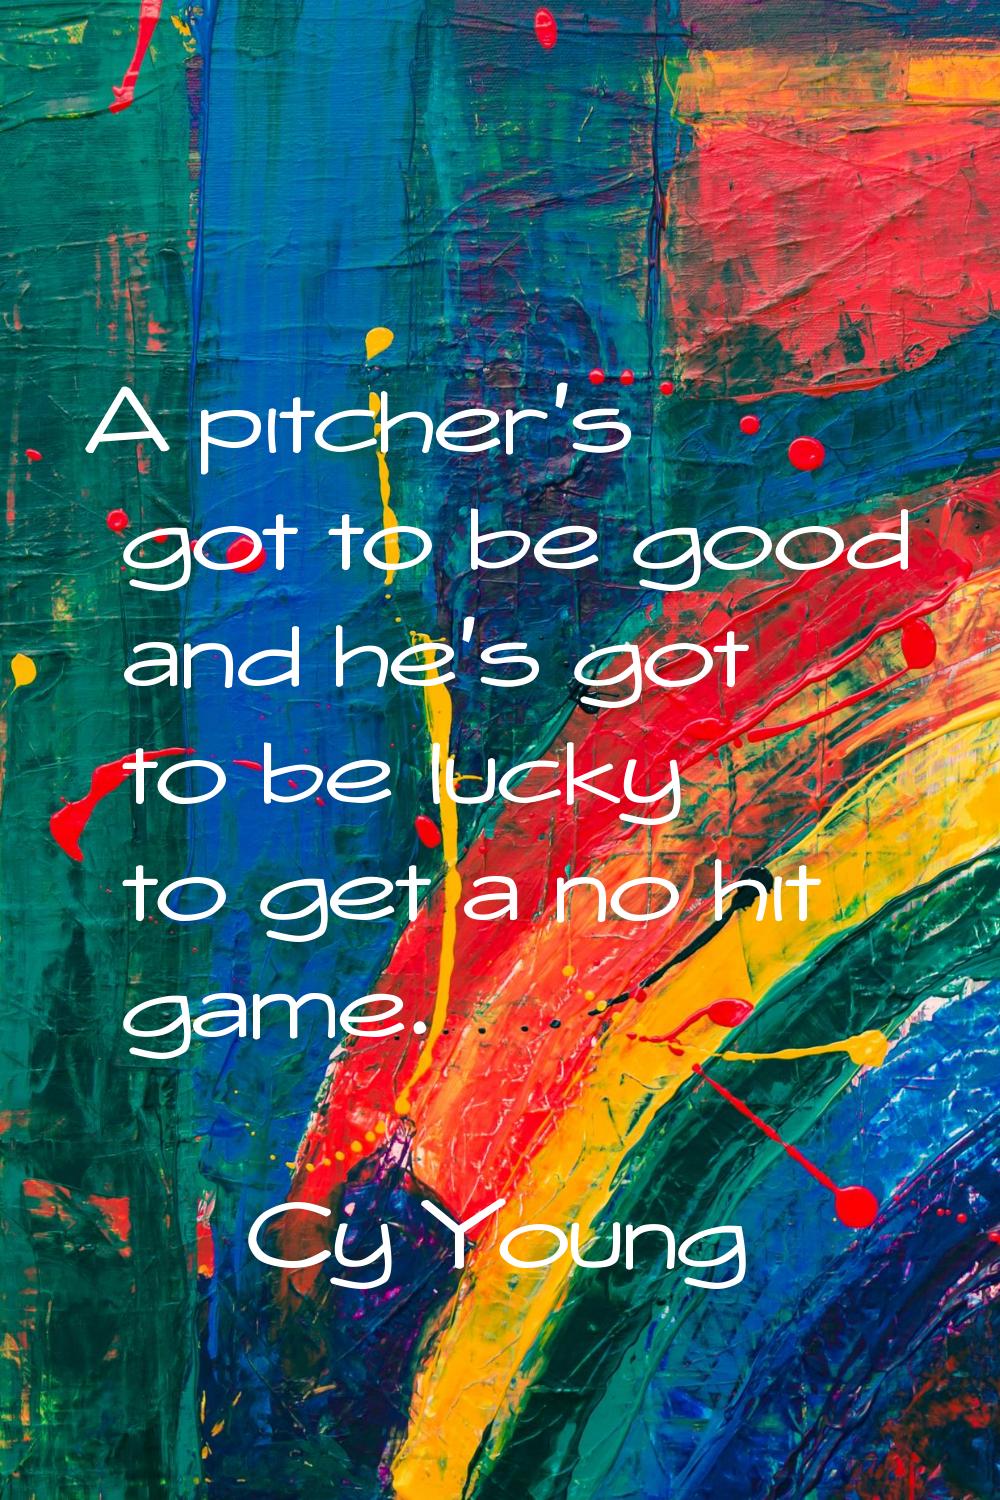 A pitcher's got to be good and he's got to be lucky to get a no hit game.